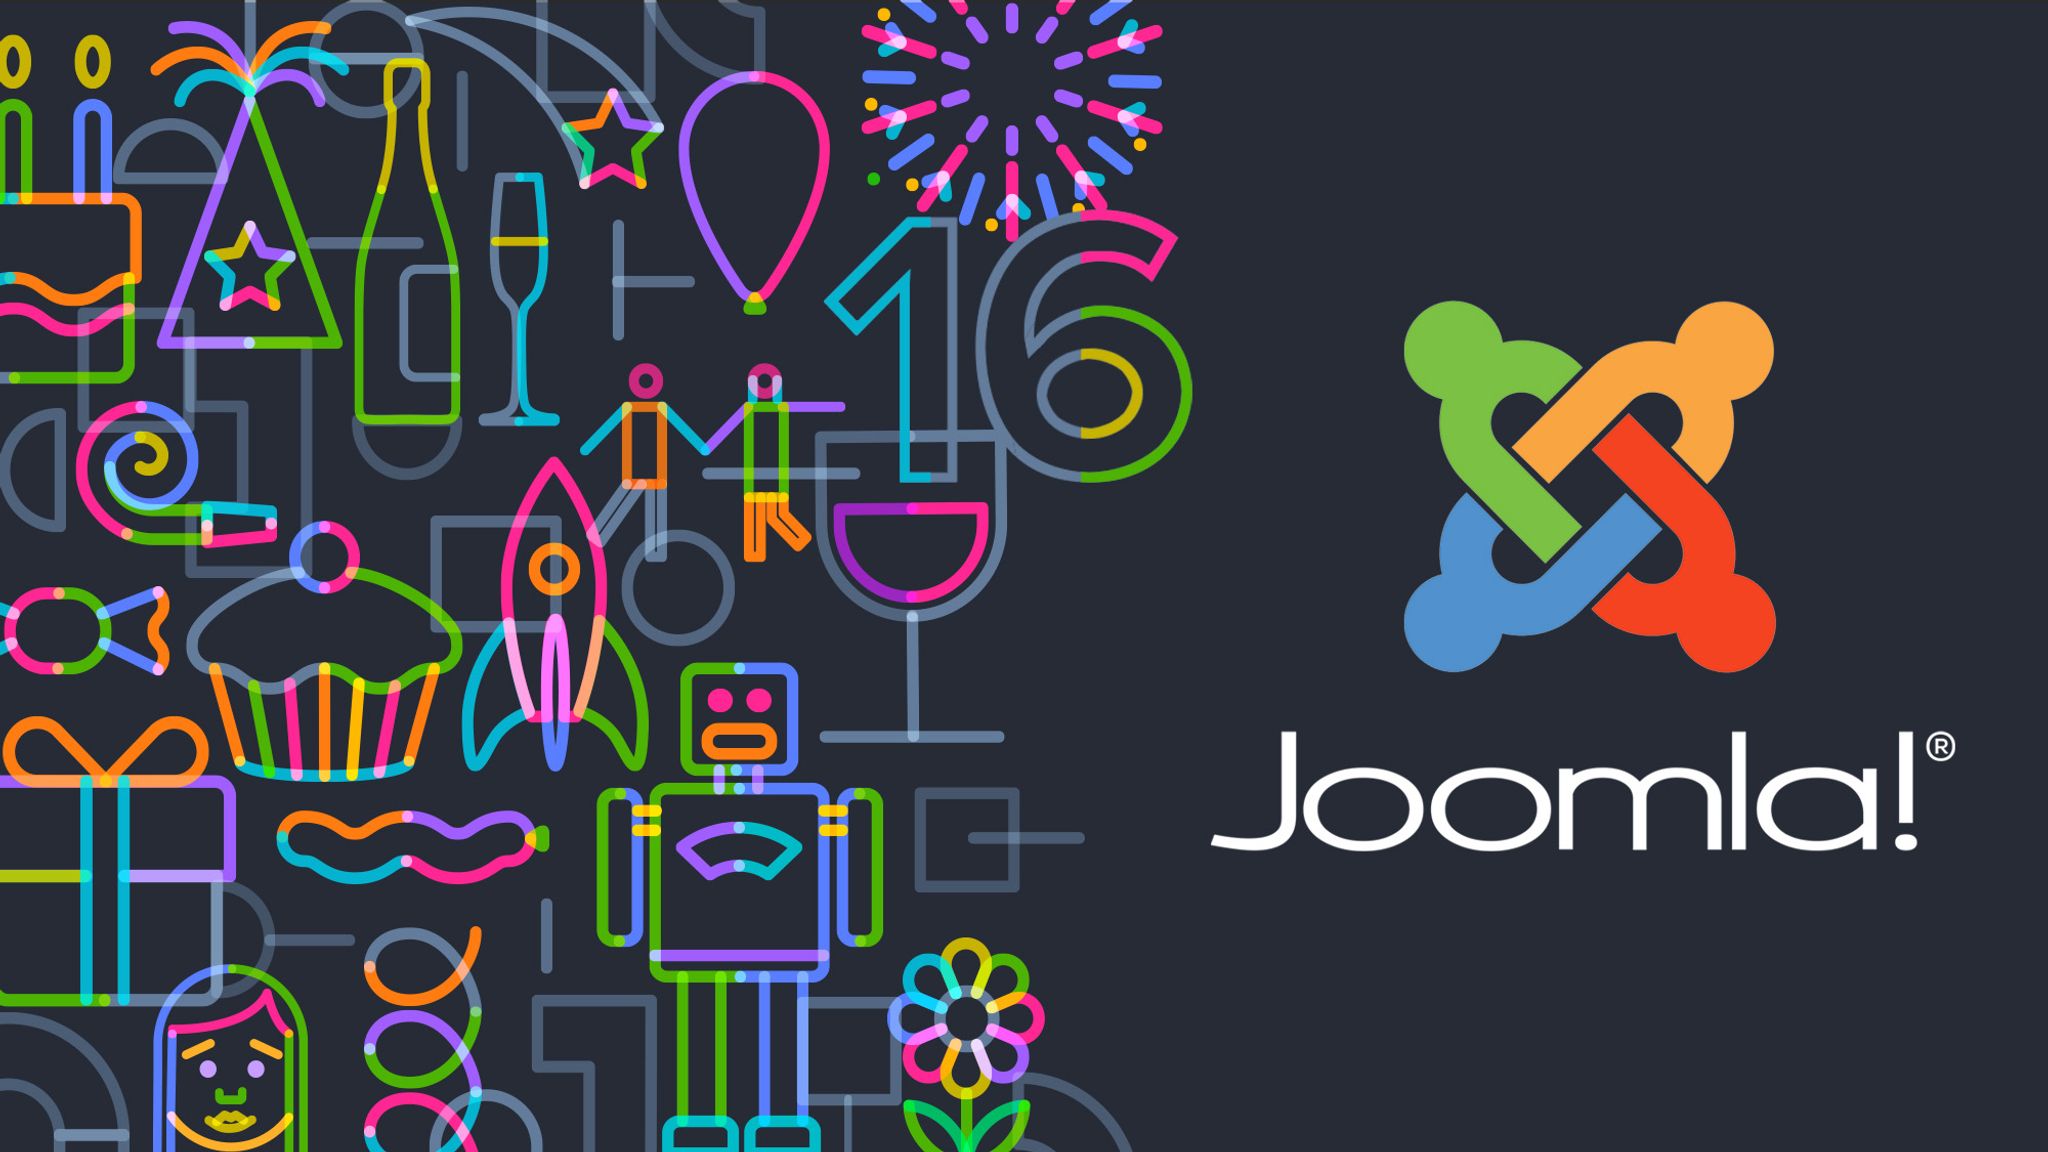 Background graphics of birthday themed elements with Joomla logo